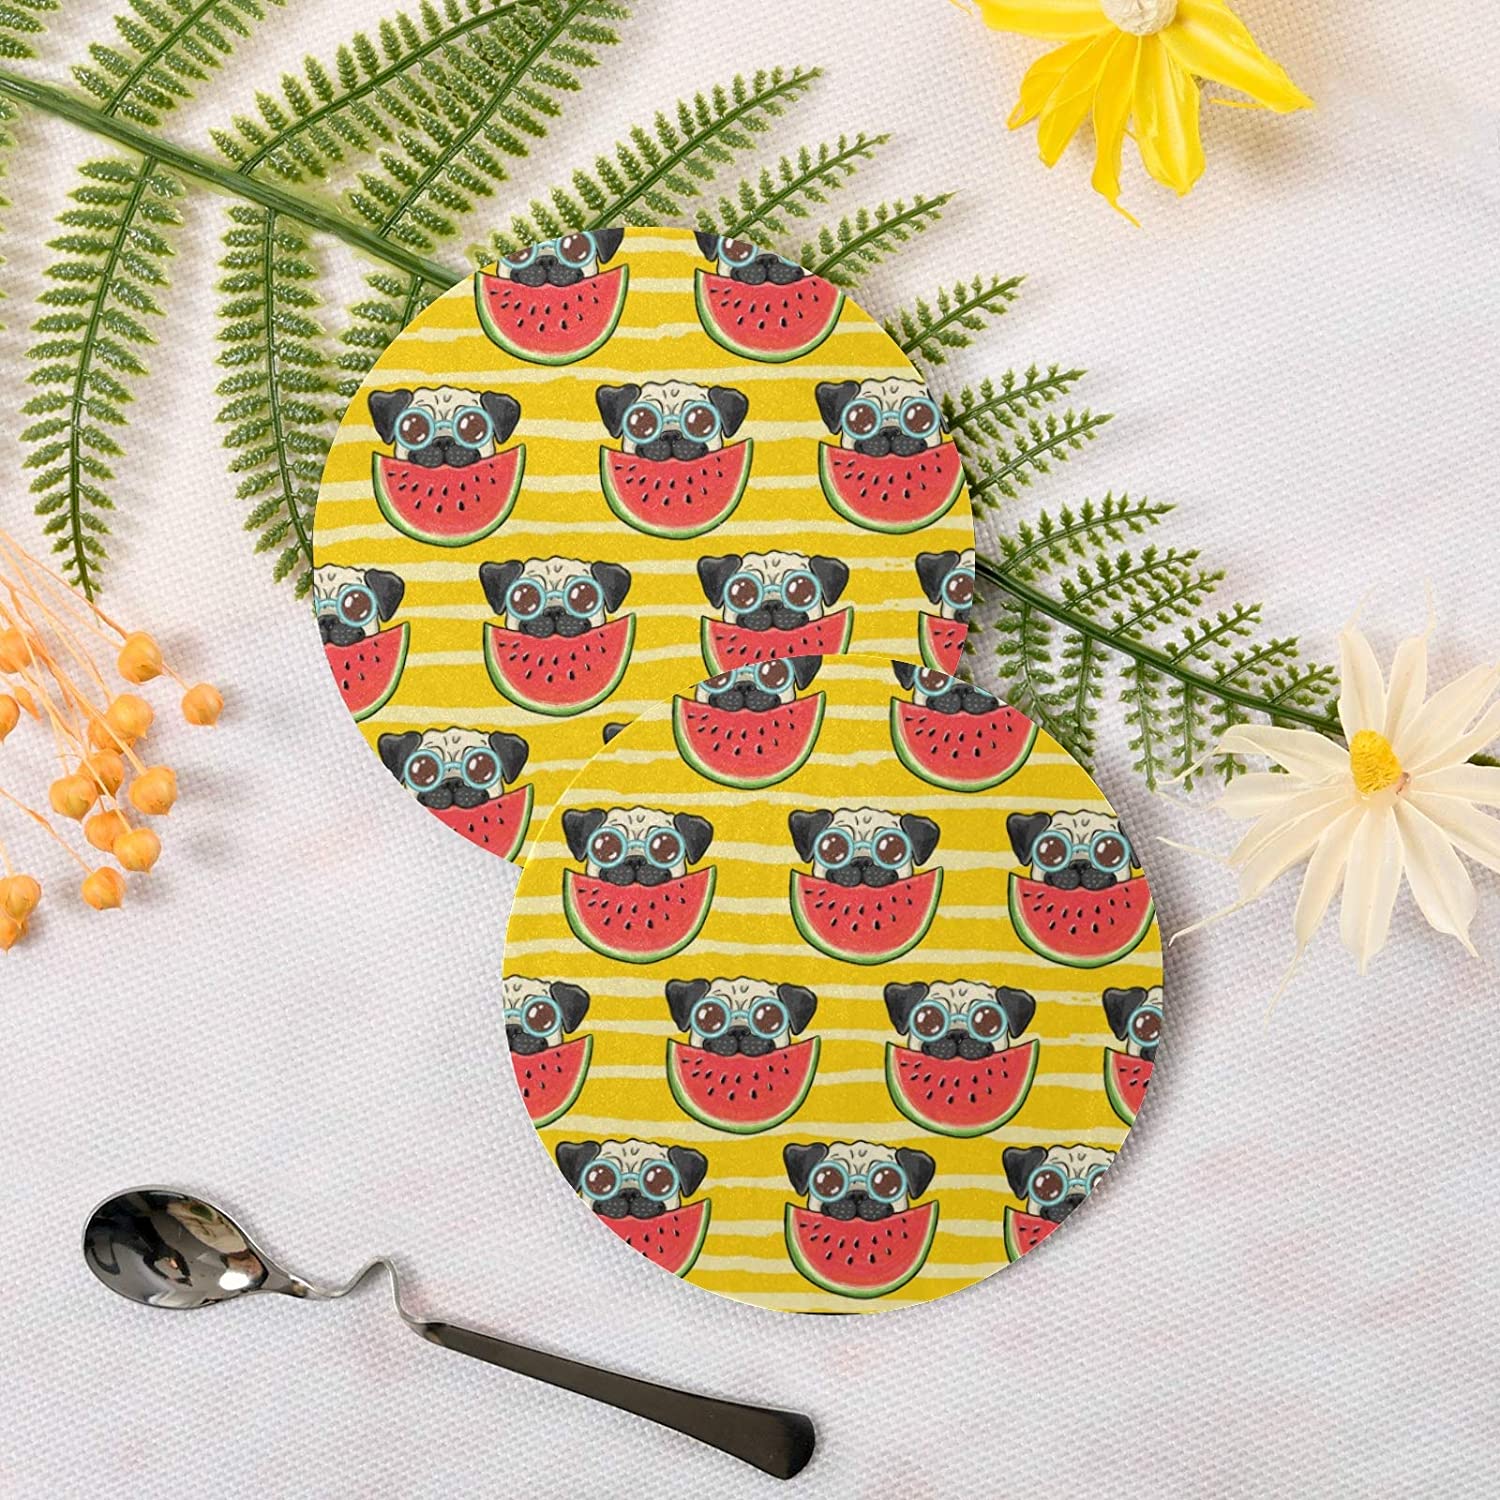 visesunny Funny Pug Dog in Sunglasses Watermelon Drink Coaster Moisture Absorbing Stone Coasters with Cork Base for Tabletop Protection Prevent Furniture Damage, 2 Pieces